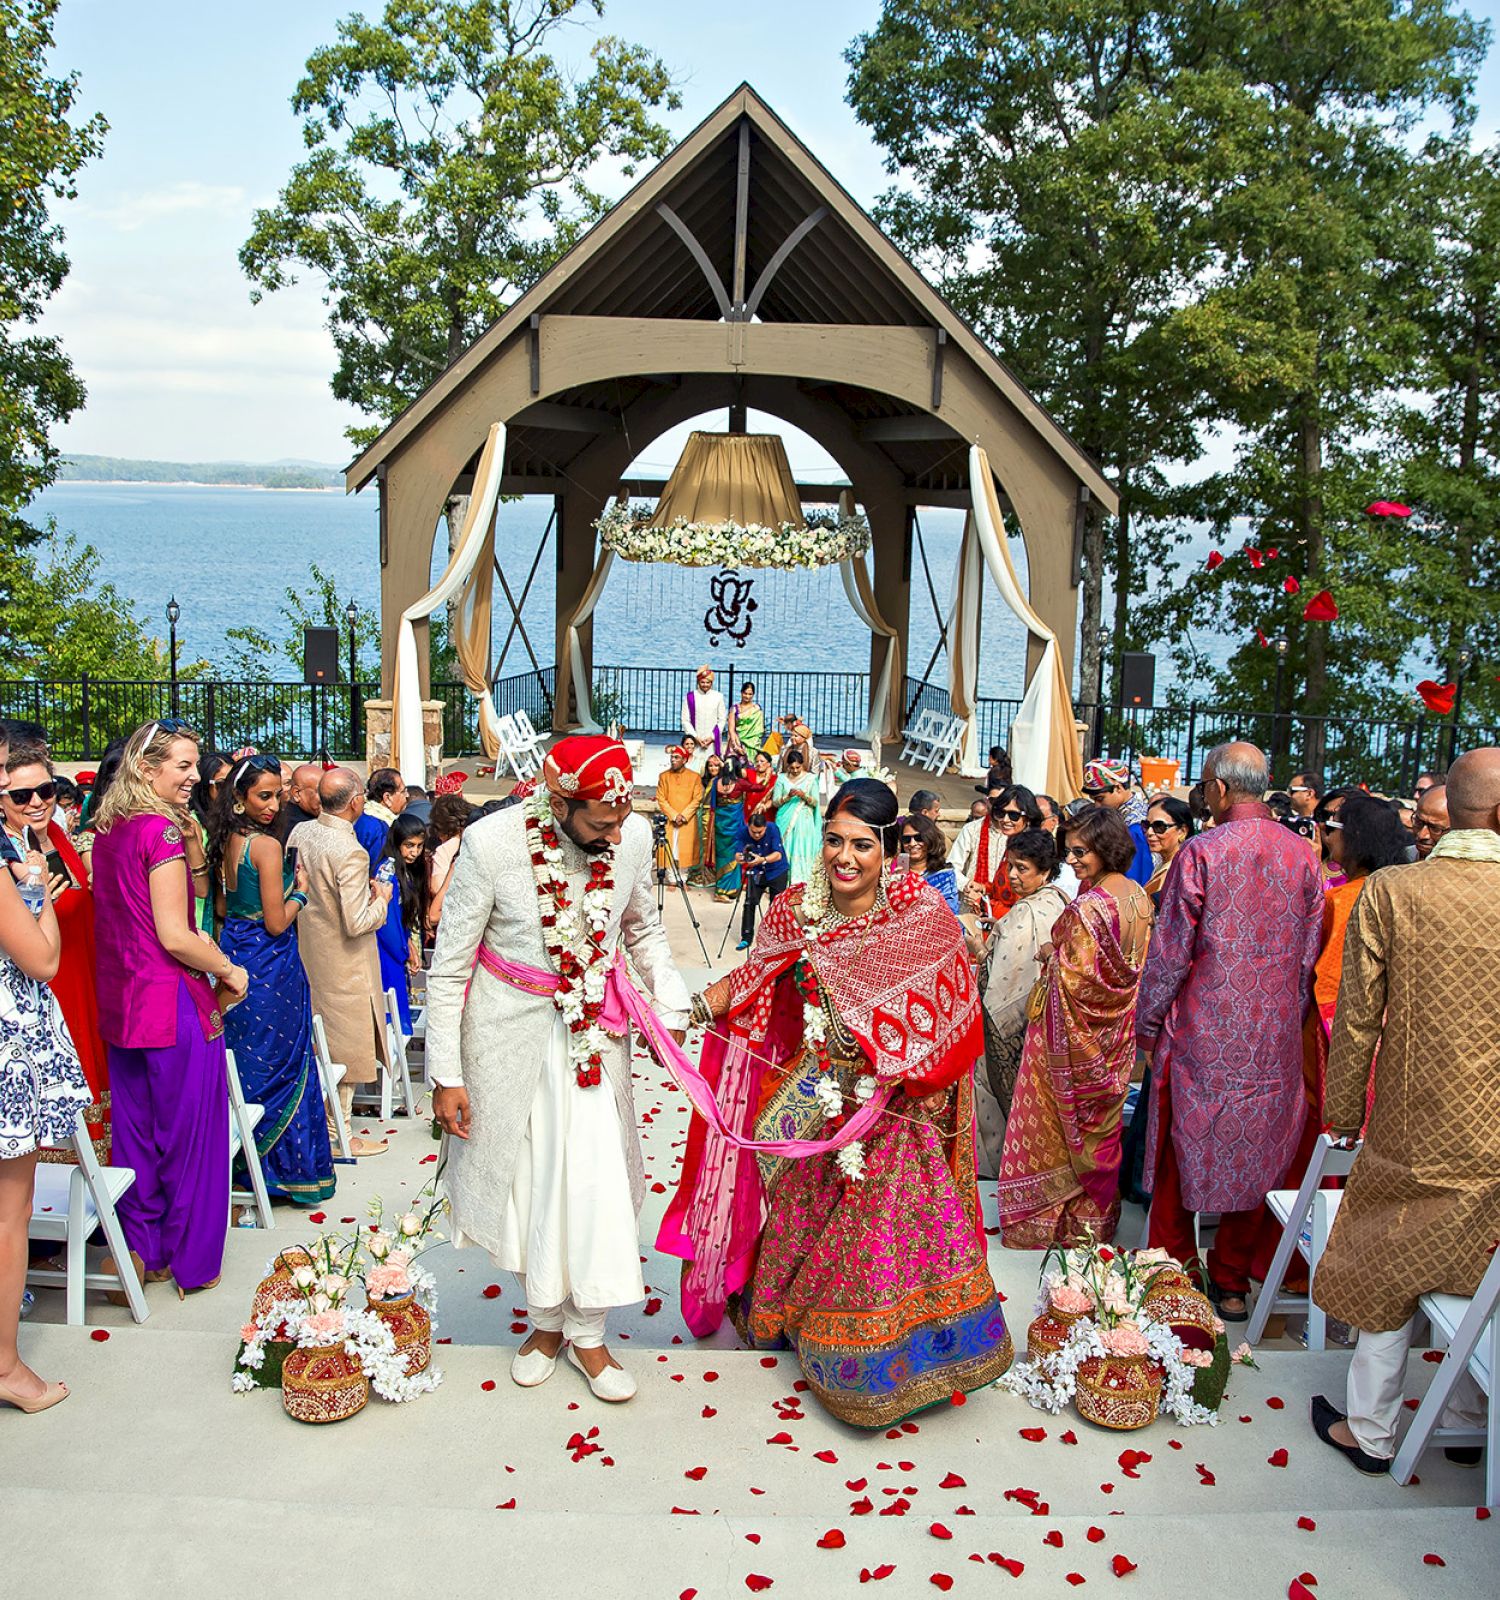 A couple in traditional attire is having an outdoor wedding ceremony by a lake, surrounded by guests and decorated with flowers.